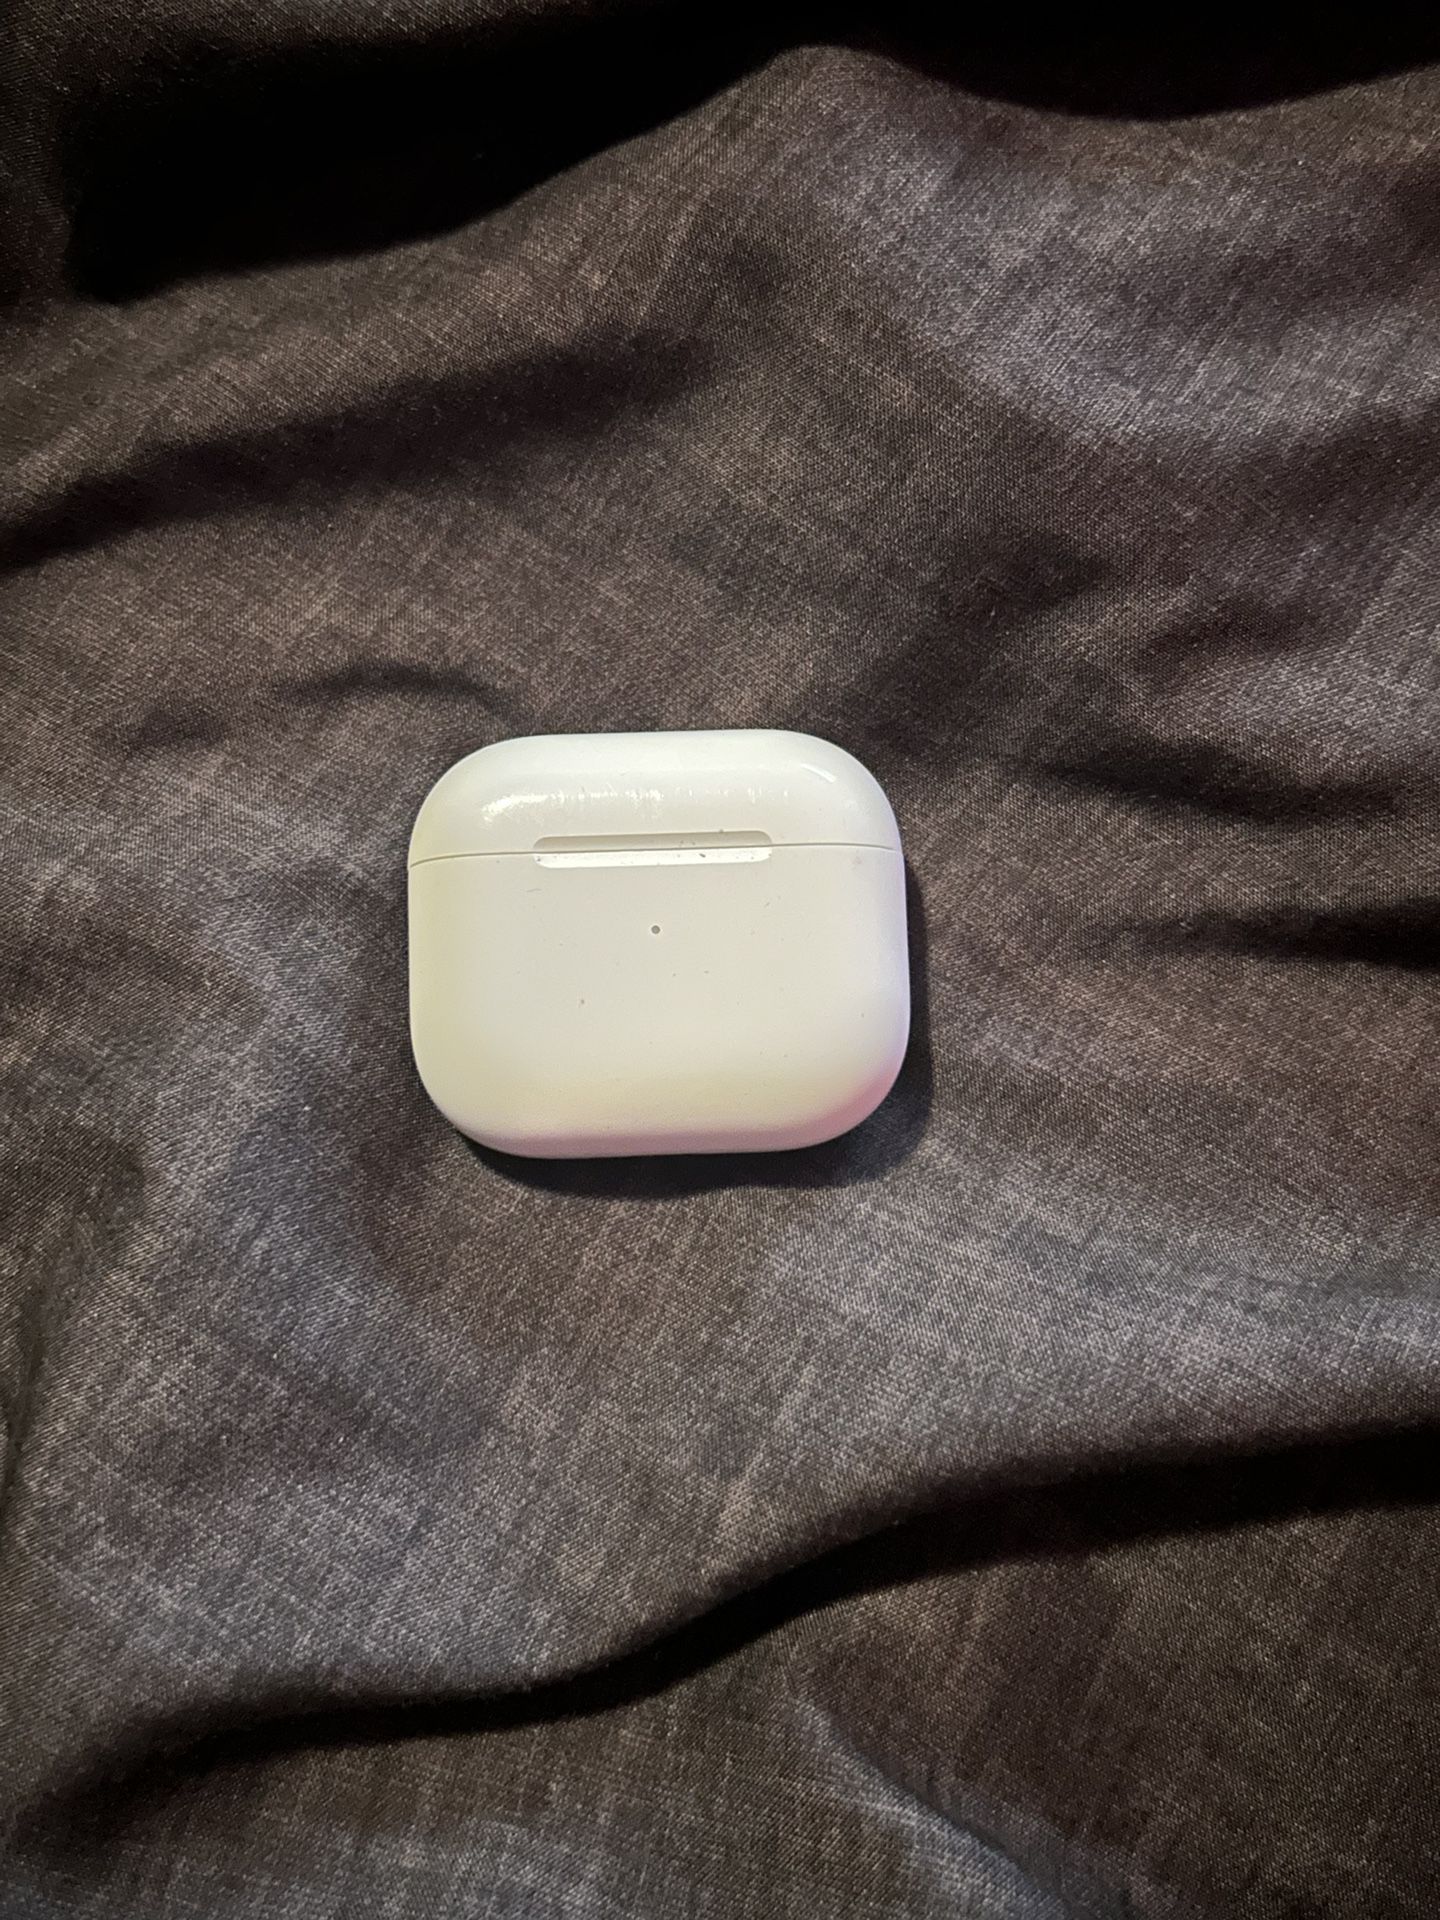 3rd Generation AirPods 